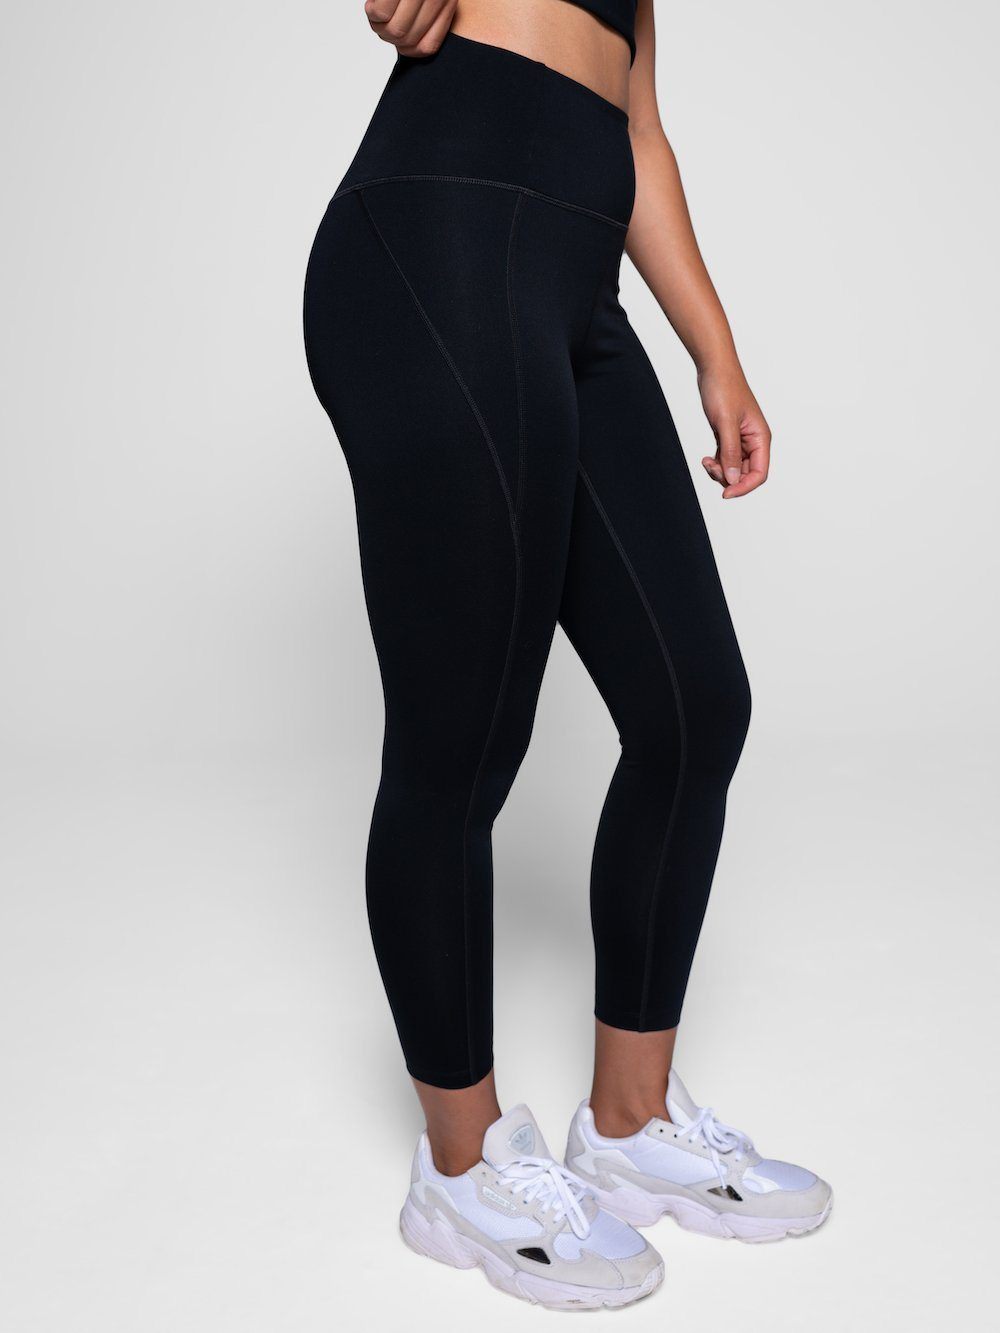 Girlfriend Collective W's Compressive Legging - 7/8 - Made From Recycled Plastic Bottles Black Pants